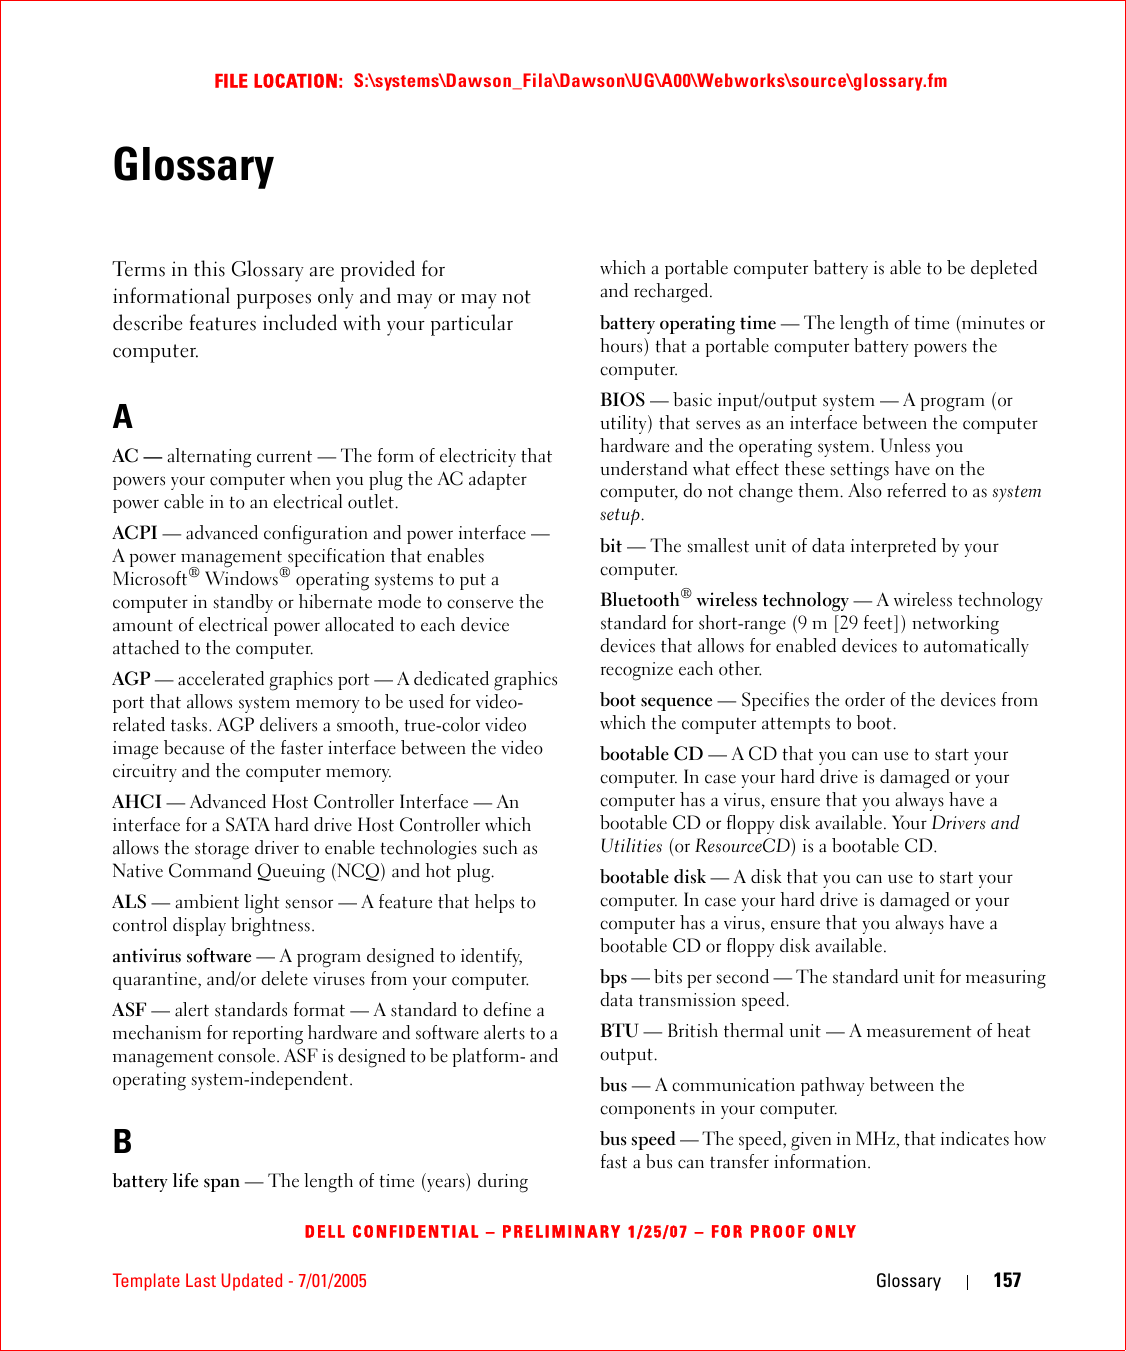 Template Last Updated - 7/01/2005 Glossary 157FILE LOCATION:  S:\systems\Dawson_Fila\Dawson\UG\A00\Webworks\source\glossary.fmDELL CONFIDENTIAL – PRELIMINARY 1/25/07 – FOR PROOF ONLYGlossaryTerms in this Glossary are provided for informational purposes only and may or may not describe features included with your particular computer.AAC — alternating current — The form of electricity that powers your computer when you plug the AC adapter power cable in to an electrical outlet.ACPI — advanced configuration and power interface — A power management specification that enables Microsoft® Windows® operating systems to put a computer in standby or hibernate mode to conserve the amount of electrical power allocated to each device attached to the computer.AGP — accelerated graphics port — A dedicated graphics port that allows system memory to be used for video-related tasks. AGP delivers a smooth, true-color video image because of the faster interface between the video circuitry and the computer memory.AHCI — Advanced Host Controller Interface — An interface for a SATA hard drive Host Controller which allows the storage driver to enable technologies such as Native Command Queuing (NCQ) and hot plug.ALS — ambient light sensor — A feature that helps to control display brightness.antivirus software — A program designed to identify, quarantine, and/or delete viruses from your computer.ASF — alert standards format — A standard to define a mechanism for reporting hardware and software alerts to a management console. ASF is designed to be platform- and operating system-independent.Bbattery life span — The length of time (years) during which a portable computer battery is able to be depleted and recharged.battery operating time — The length of time (minutes or hours) that a portable computer battery powers the computer.BIOS — basic input/output system — A program (or utility) that serves as an interface between the computer hardware and the operating system. Unless you understand what effect these settings have on the computer, do not change them. Also referred to as system setup.bit — The smallest unit of data interpreted by your computer.Bluetooth® wireless technology — A wireless technology standard for short-range (9 m [29 feet]) networking devices that allows for enabled devices to automatically recognize each other.boot sequence — Specifies the order of the devices from which the computer attempts to boot.bootable CD — A CD that you can use to start your computer. In case your hard drive is damaged or your computer has a virus, ensure that you always have a bootable CD or floppy disk available. Your Drivers and Utilities (or ResourceCD) is a bootable CD.bootable disk — A disk that you can use to start your computer. In case your hard drive is damaged or your computer has a virus, ensure that you always have a bootable CD or floppy disk available.bps — bits per second — The standard unit for measuring data transmission speed.BTU — British thermal unit — A measurement of heat output.bus — A communication pathway between the components in your computer.bus speed — The speed, given in MHz, that indicates how fast a bus can transfer information.